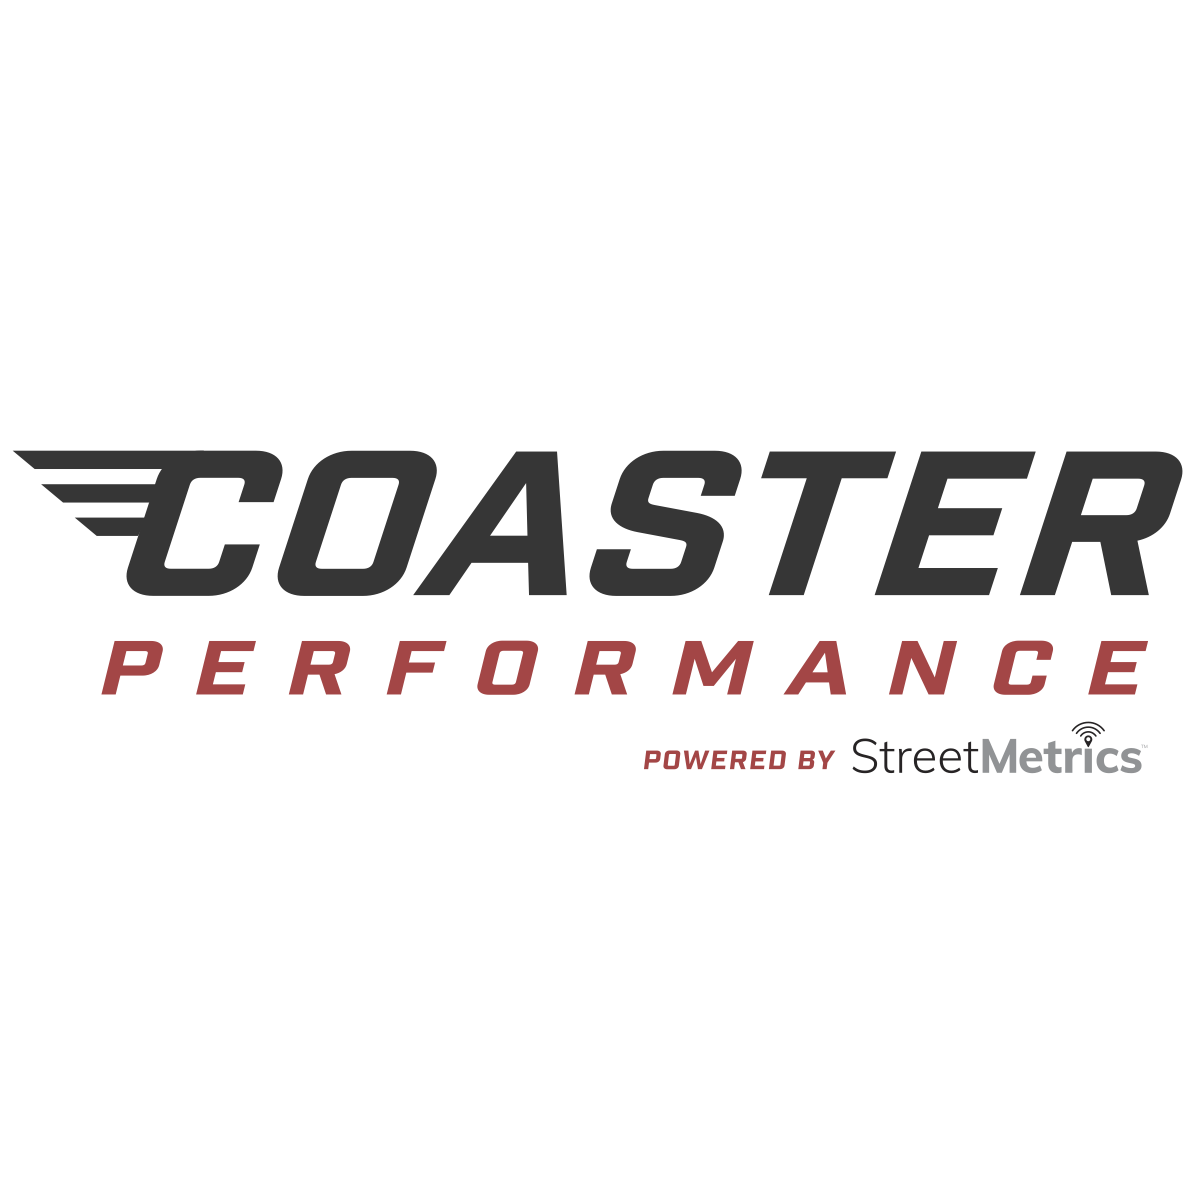 Coaster Cycles Launches Coaster Performance Technology, Giving Advertising Clients Ability to Track Real Time Impressions